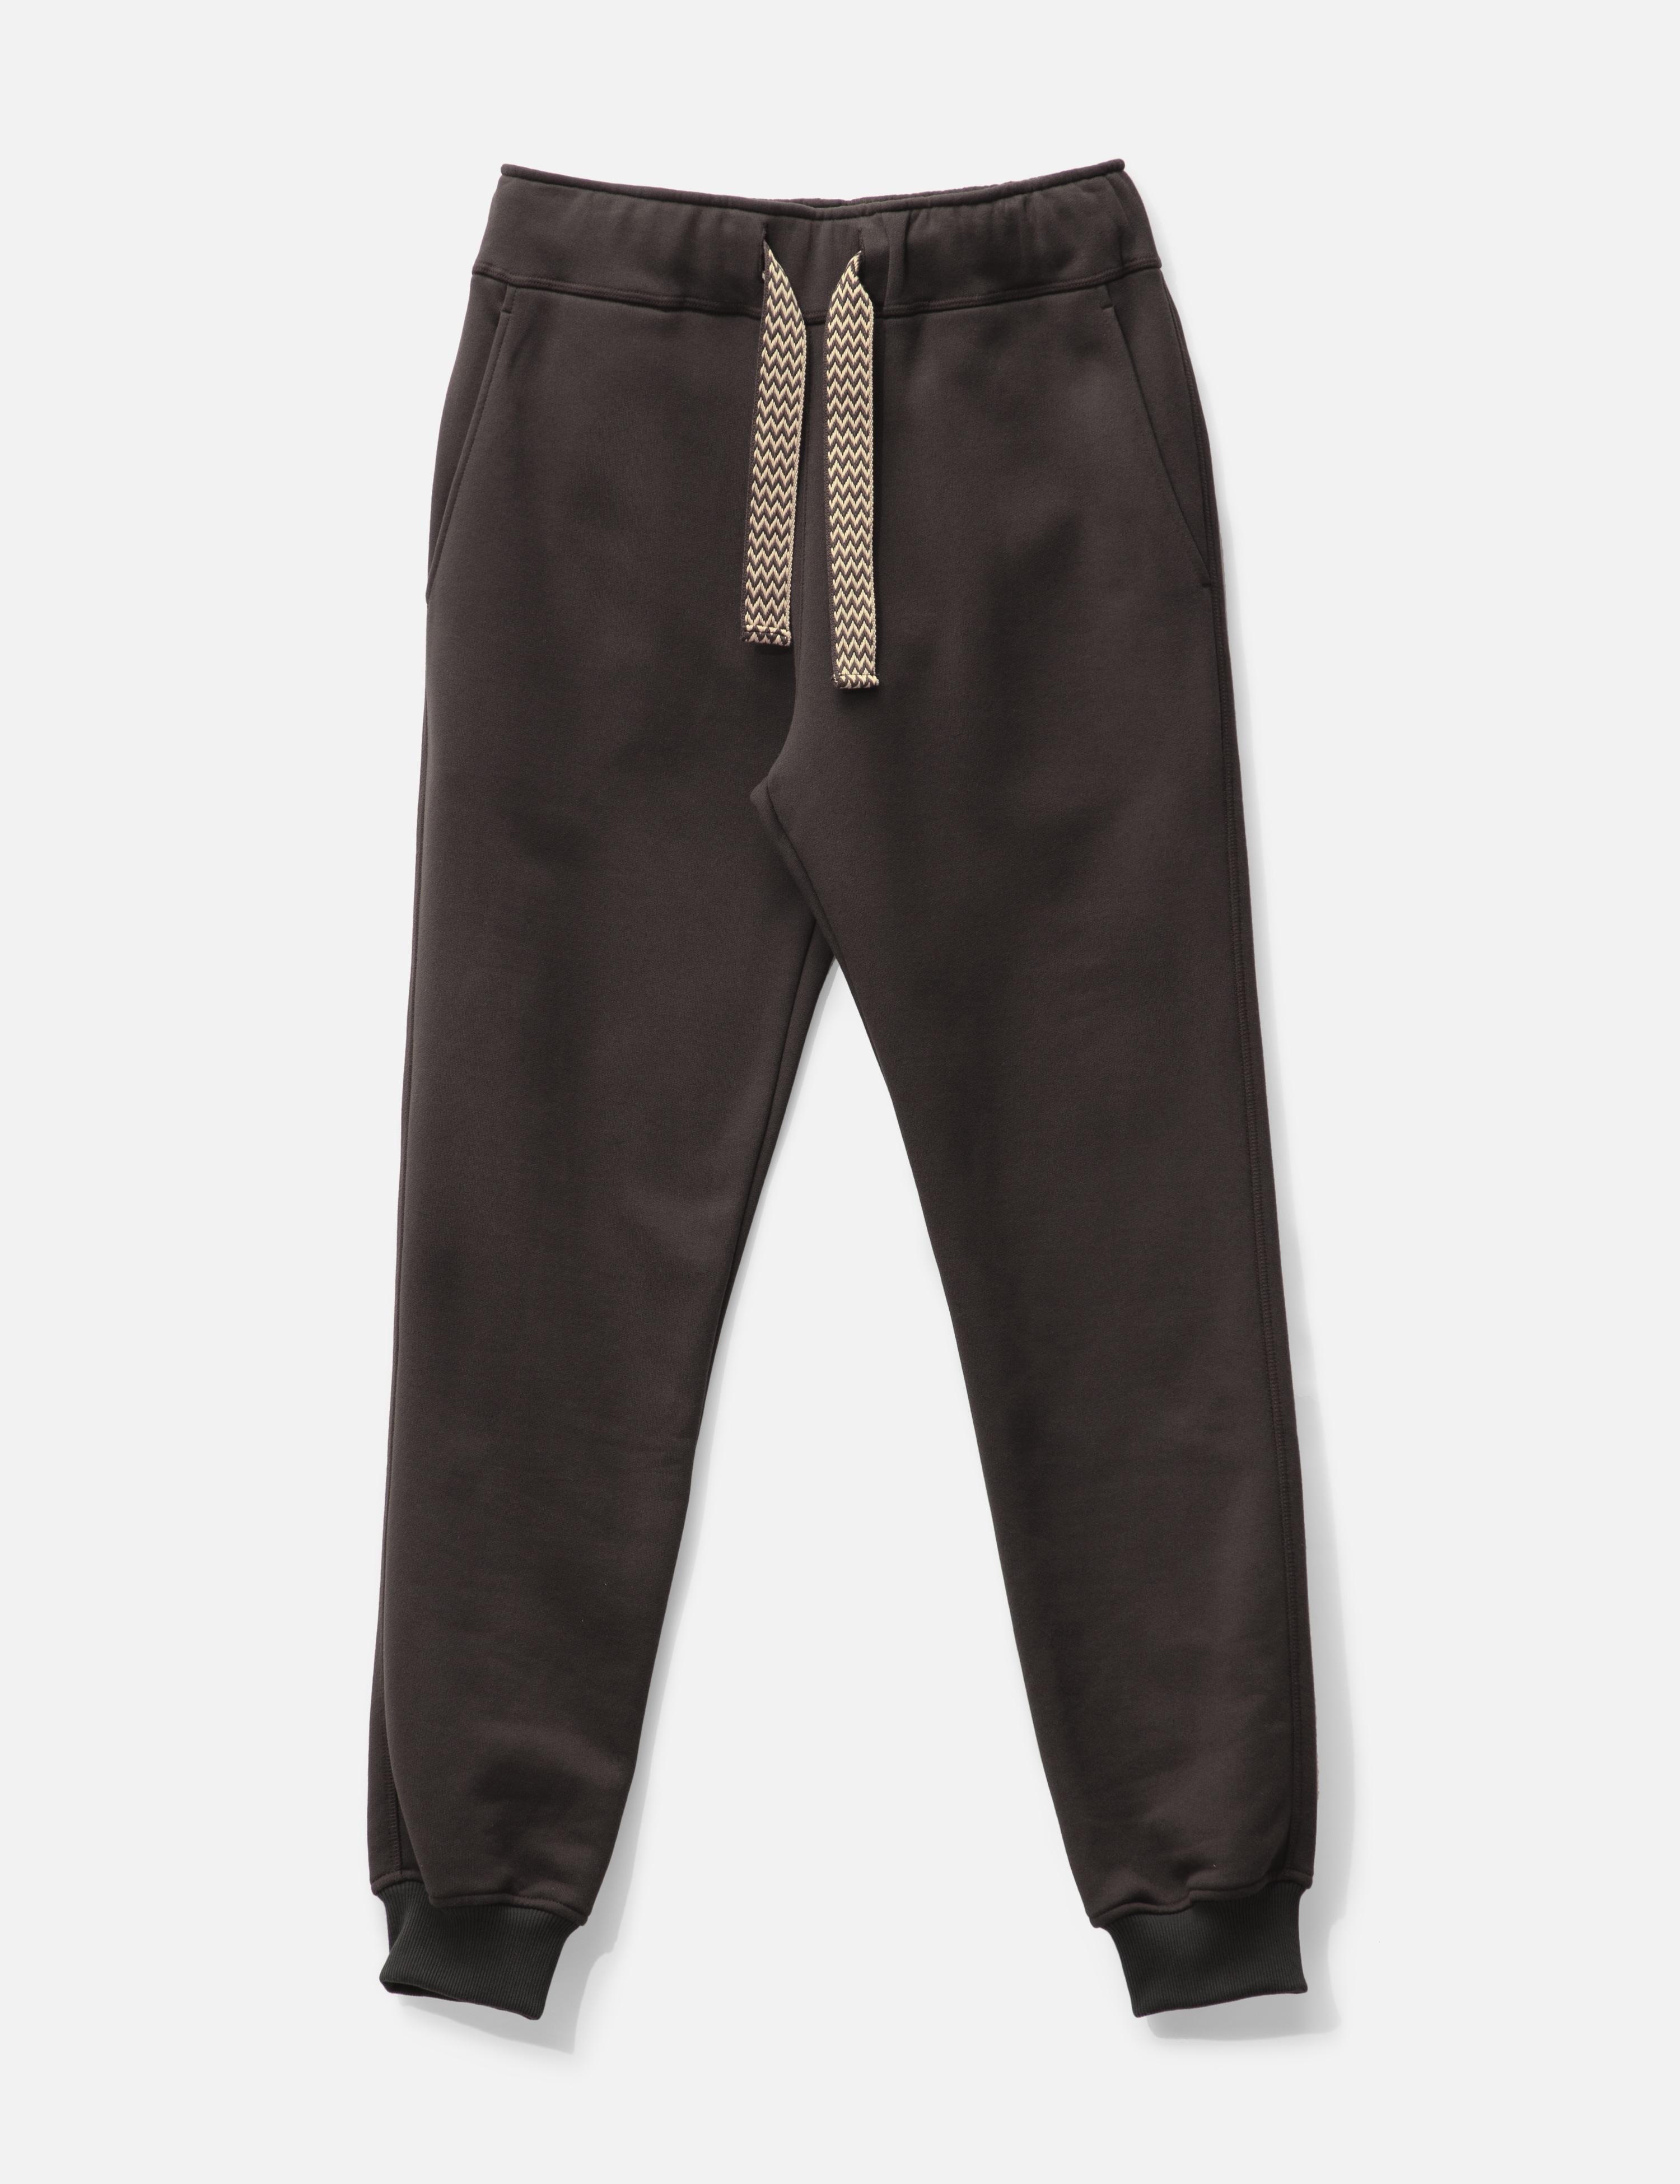 Curb Lace Joggers by LANVIN